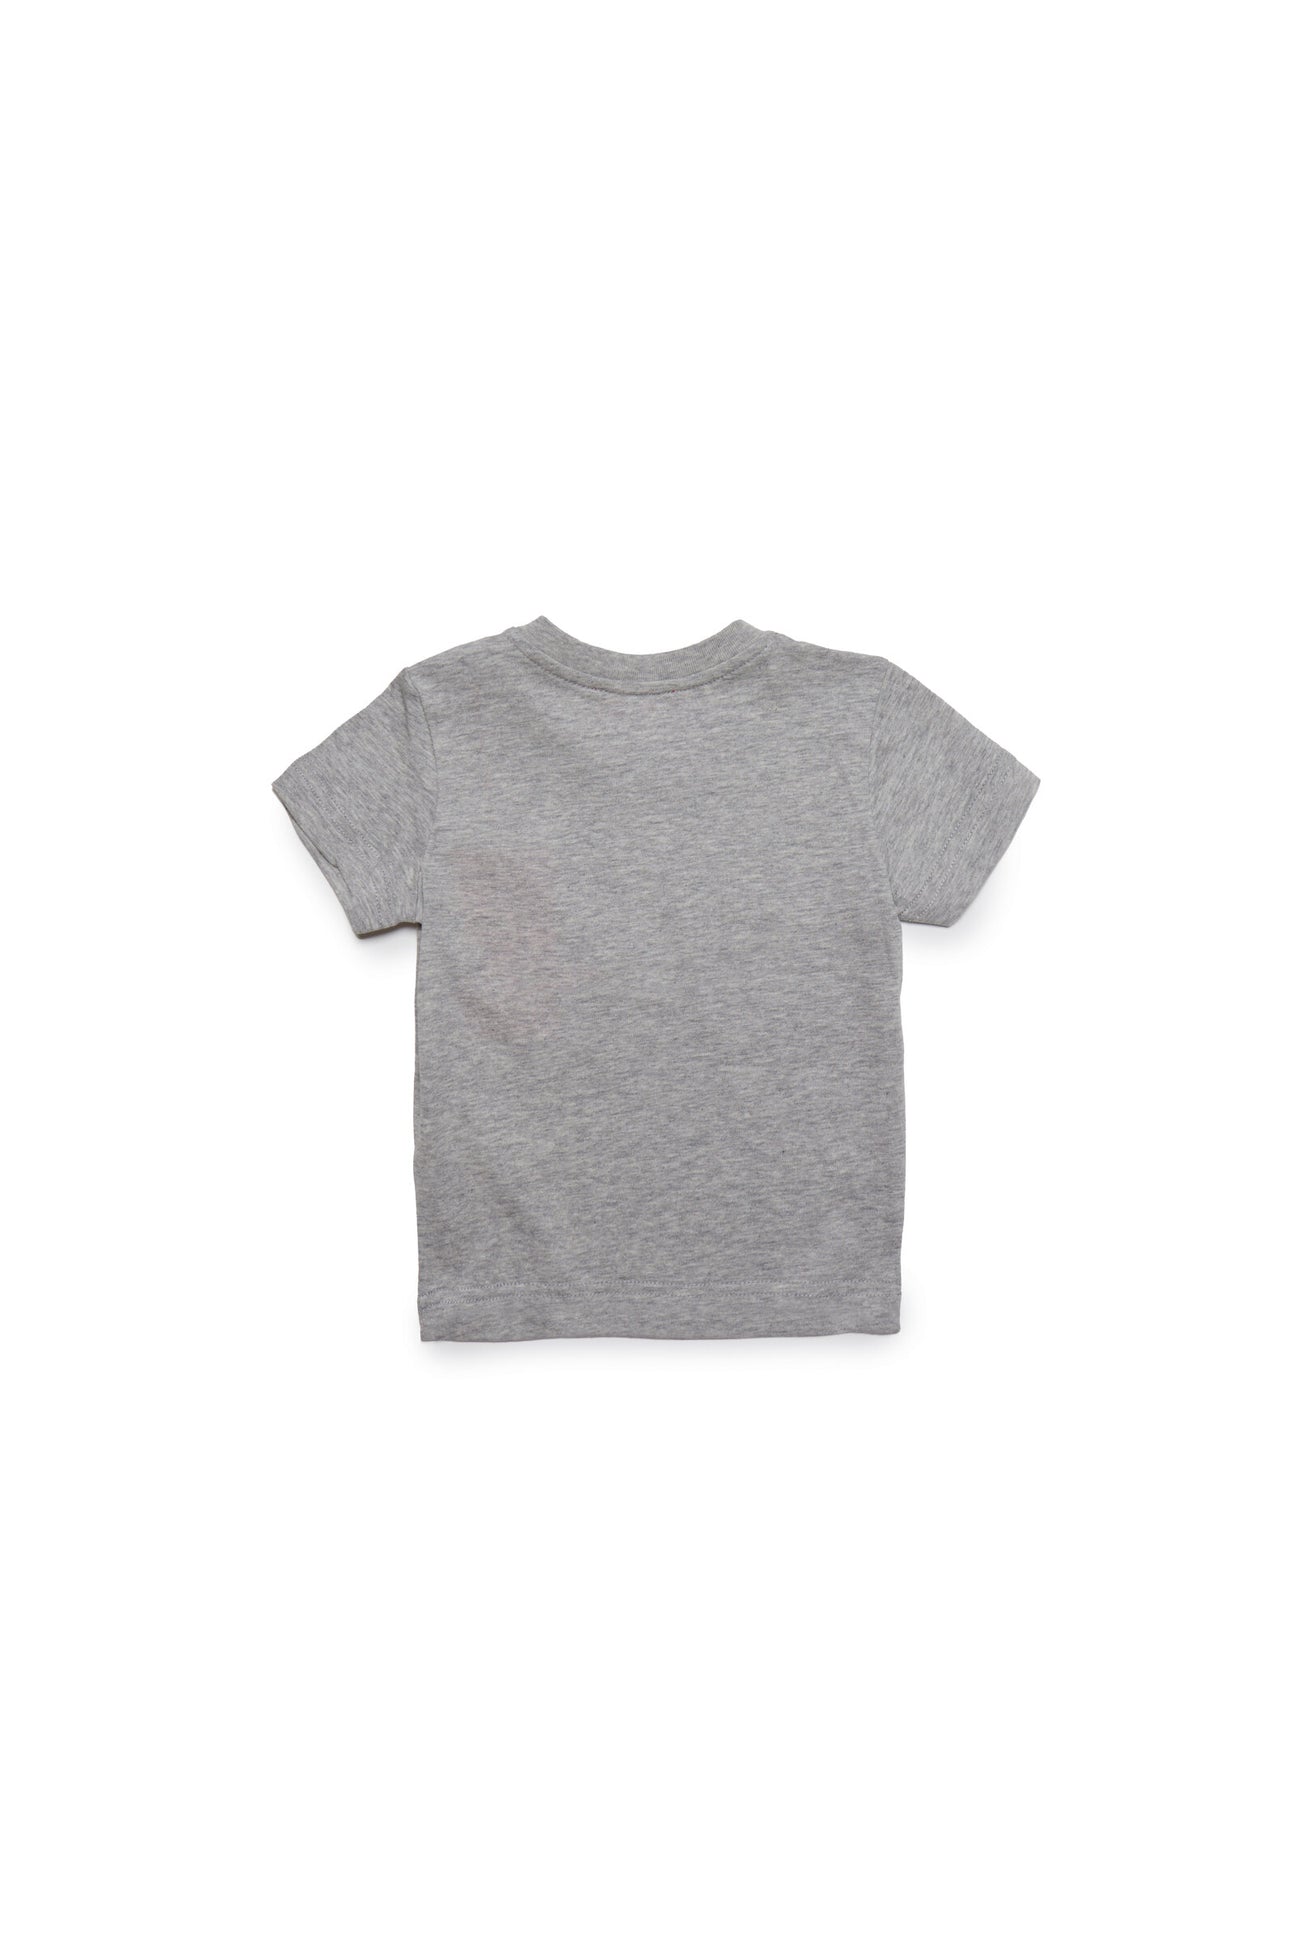 Gray t-shirt with Diesel double logo and snap button closure Gray t-shirt with Diesel double logo and snap button closure